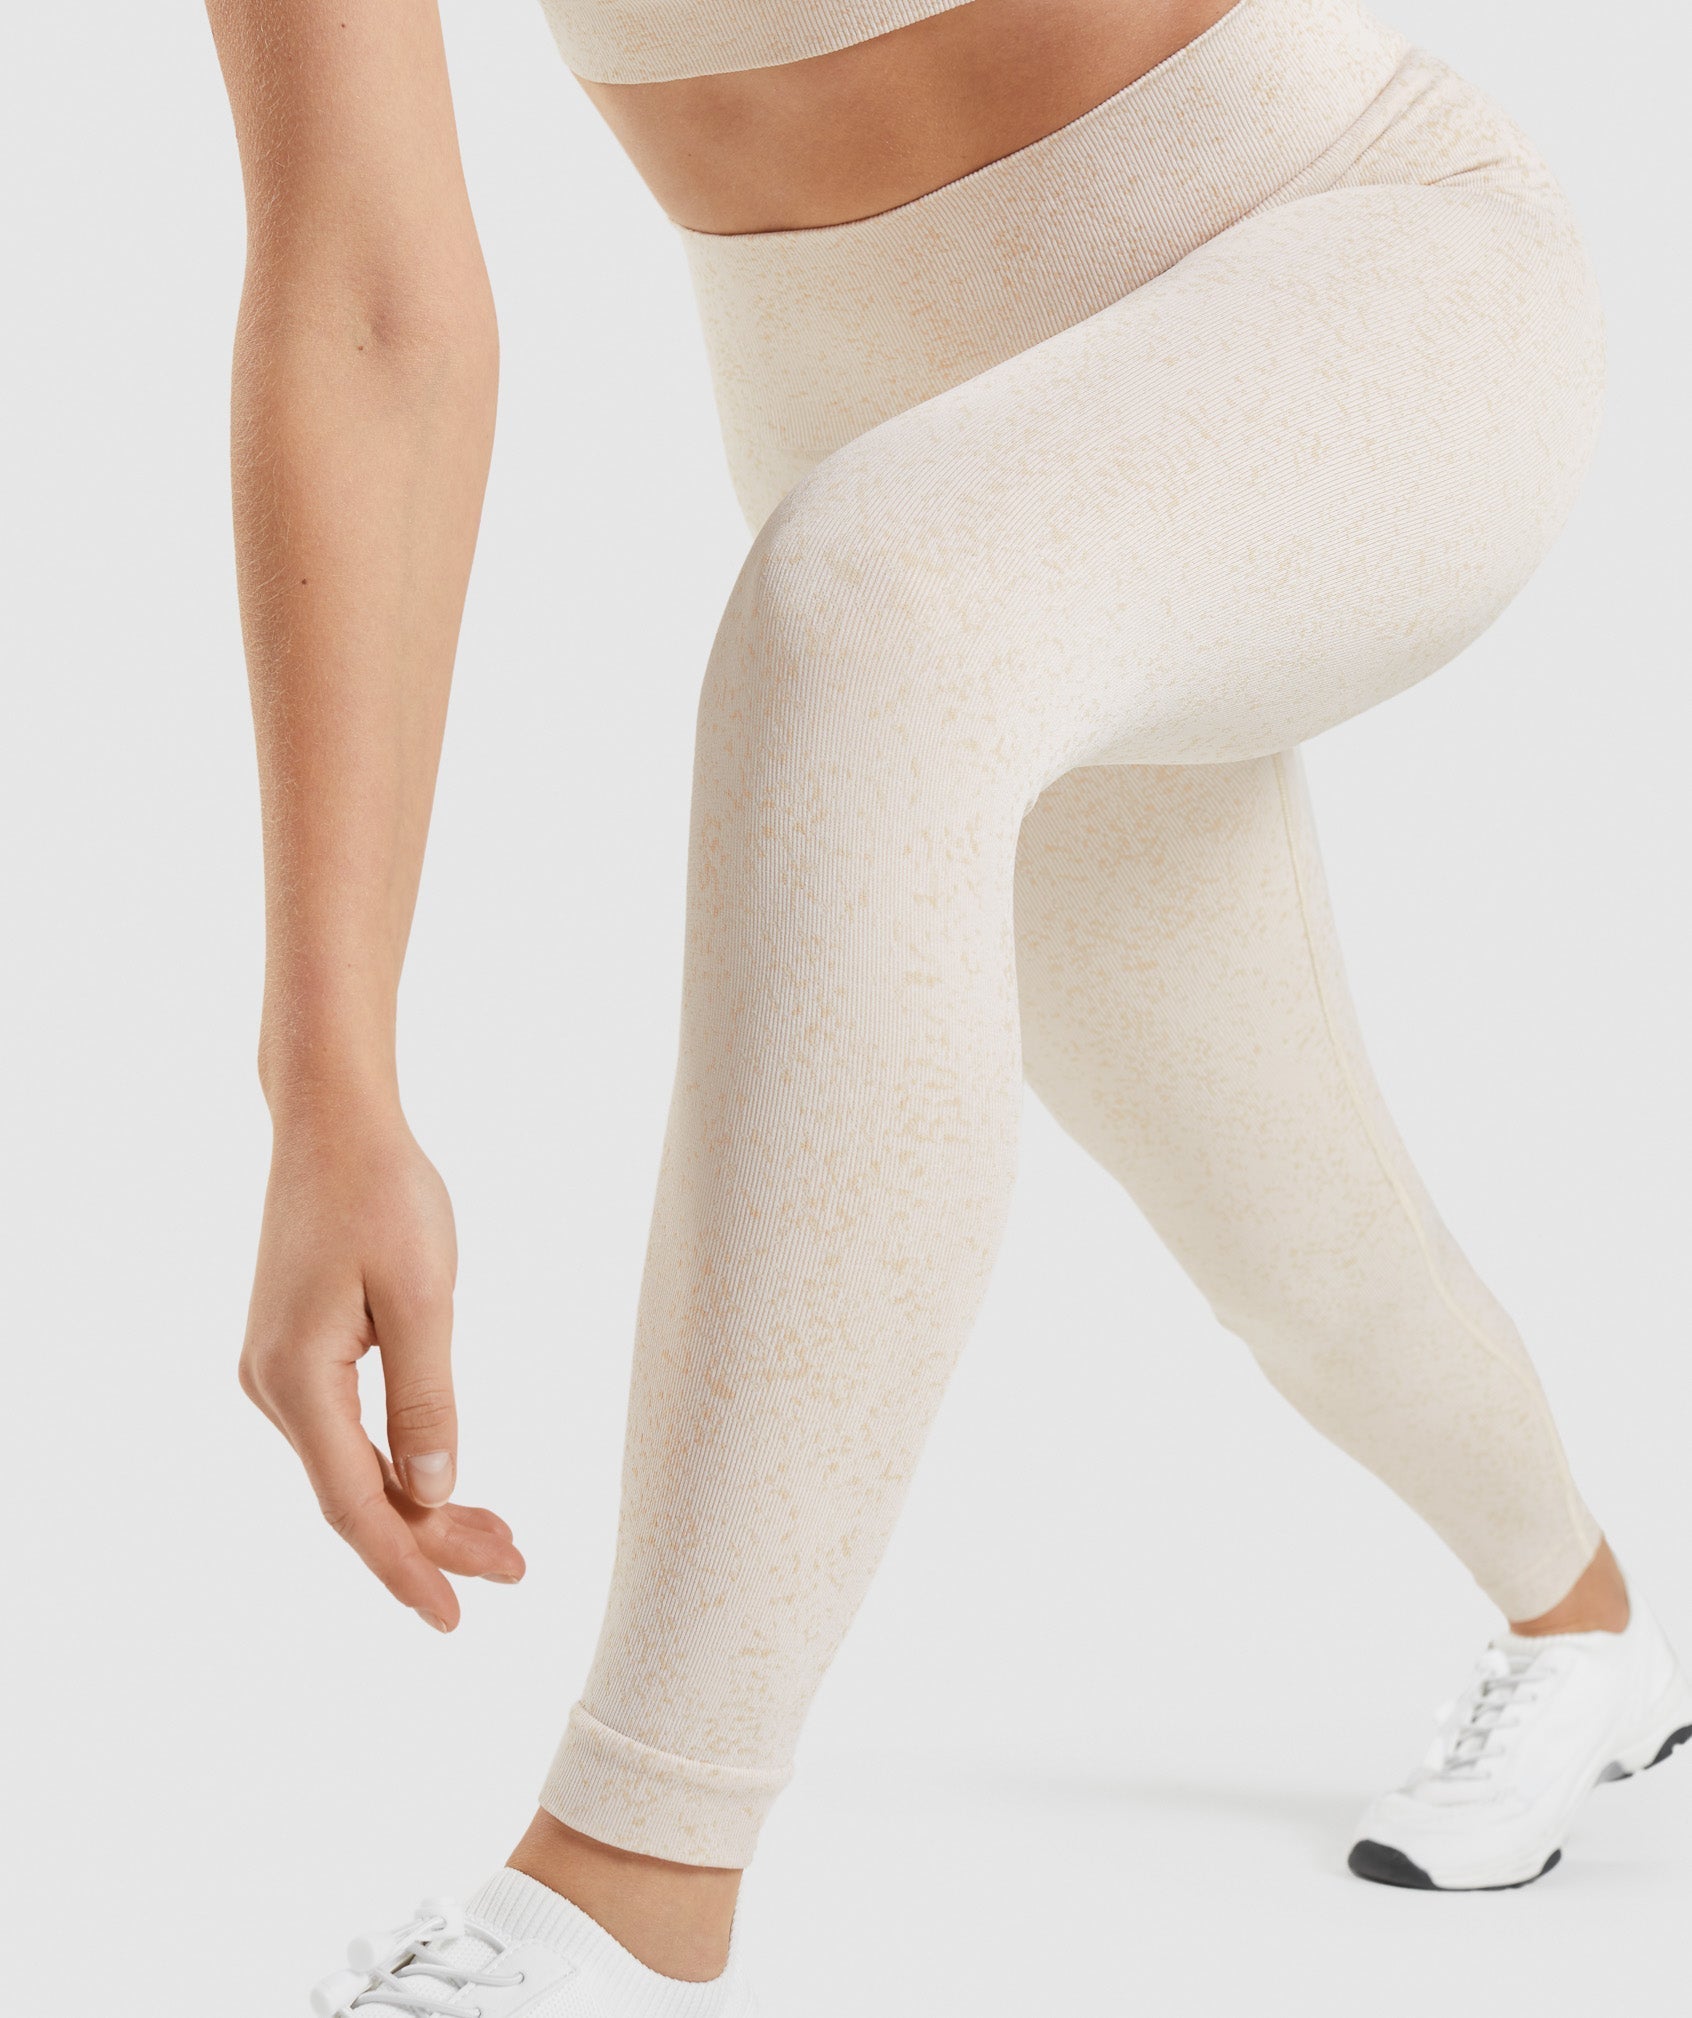 Adapt Fleck Seamless Leggings in Mineral | Coconut White - view 5